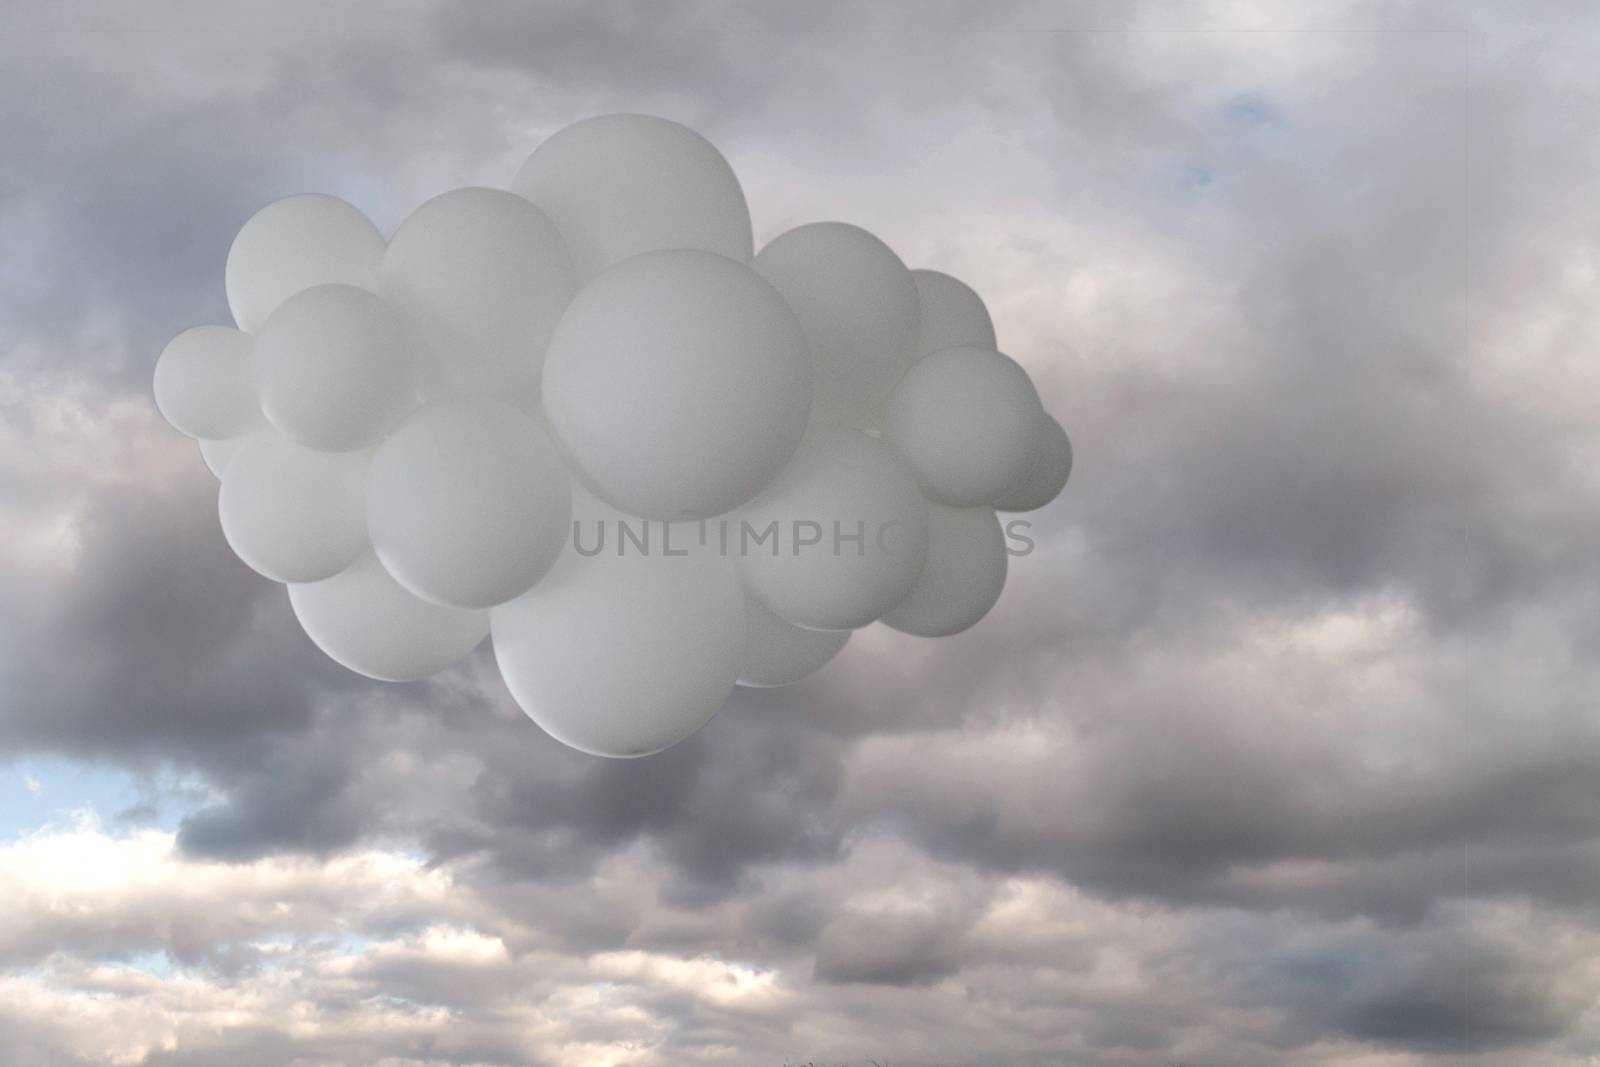 White cloud of helium balloons against a cloudy sky.